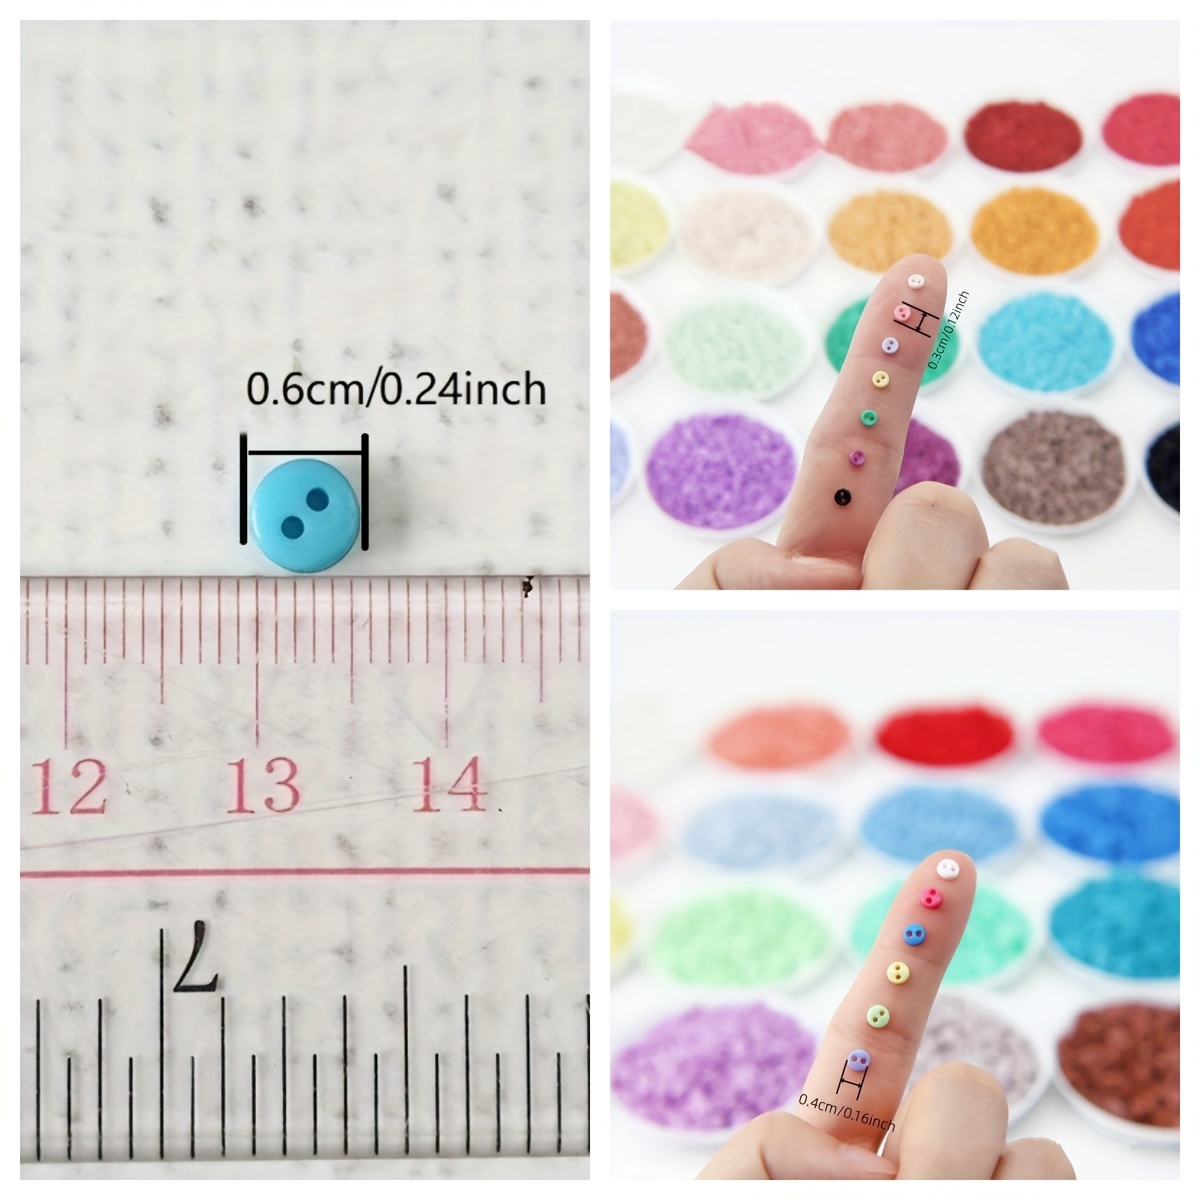 3mm Mini Buttons, Sewing Supplies, Buttons Dolls